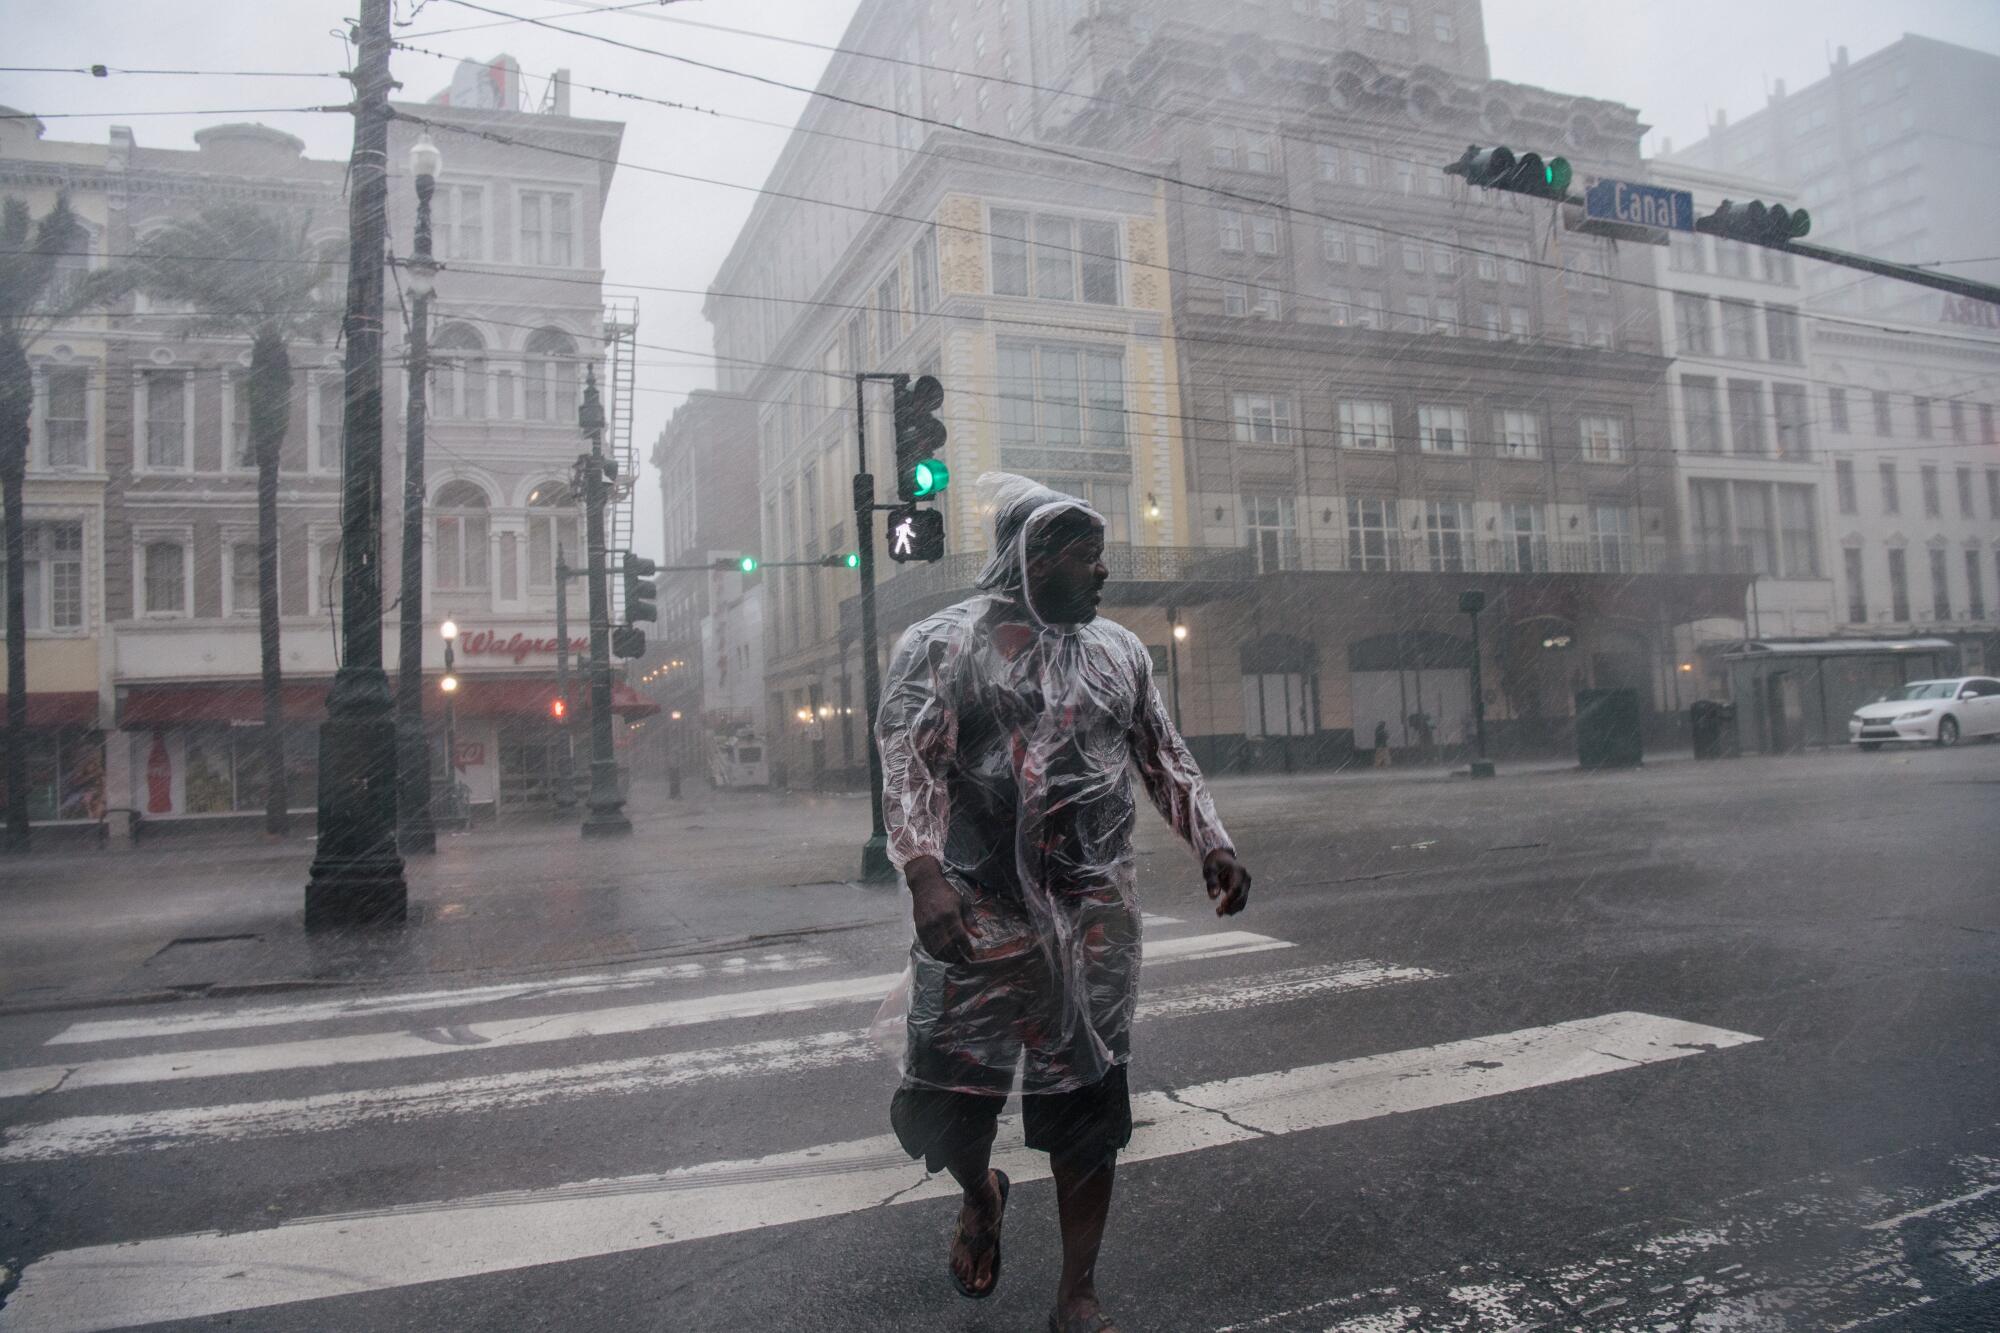 A person crosses the street during Hurricane Ida in New Orleans.